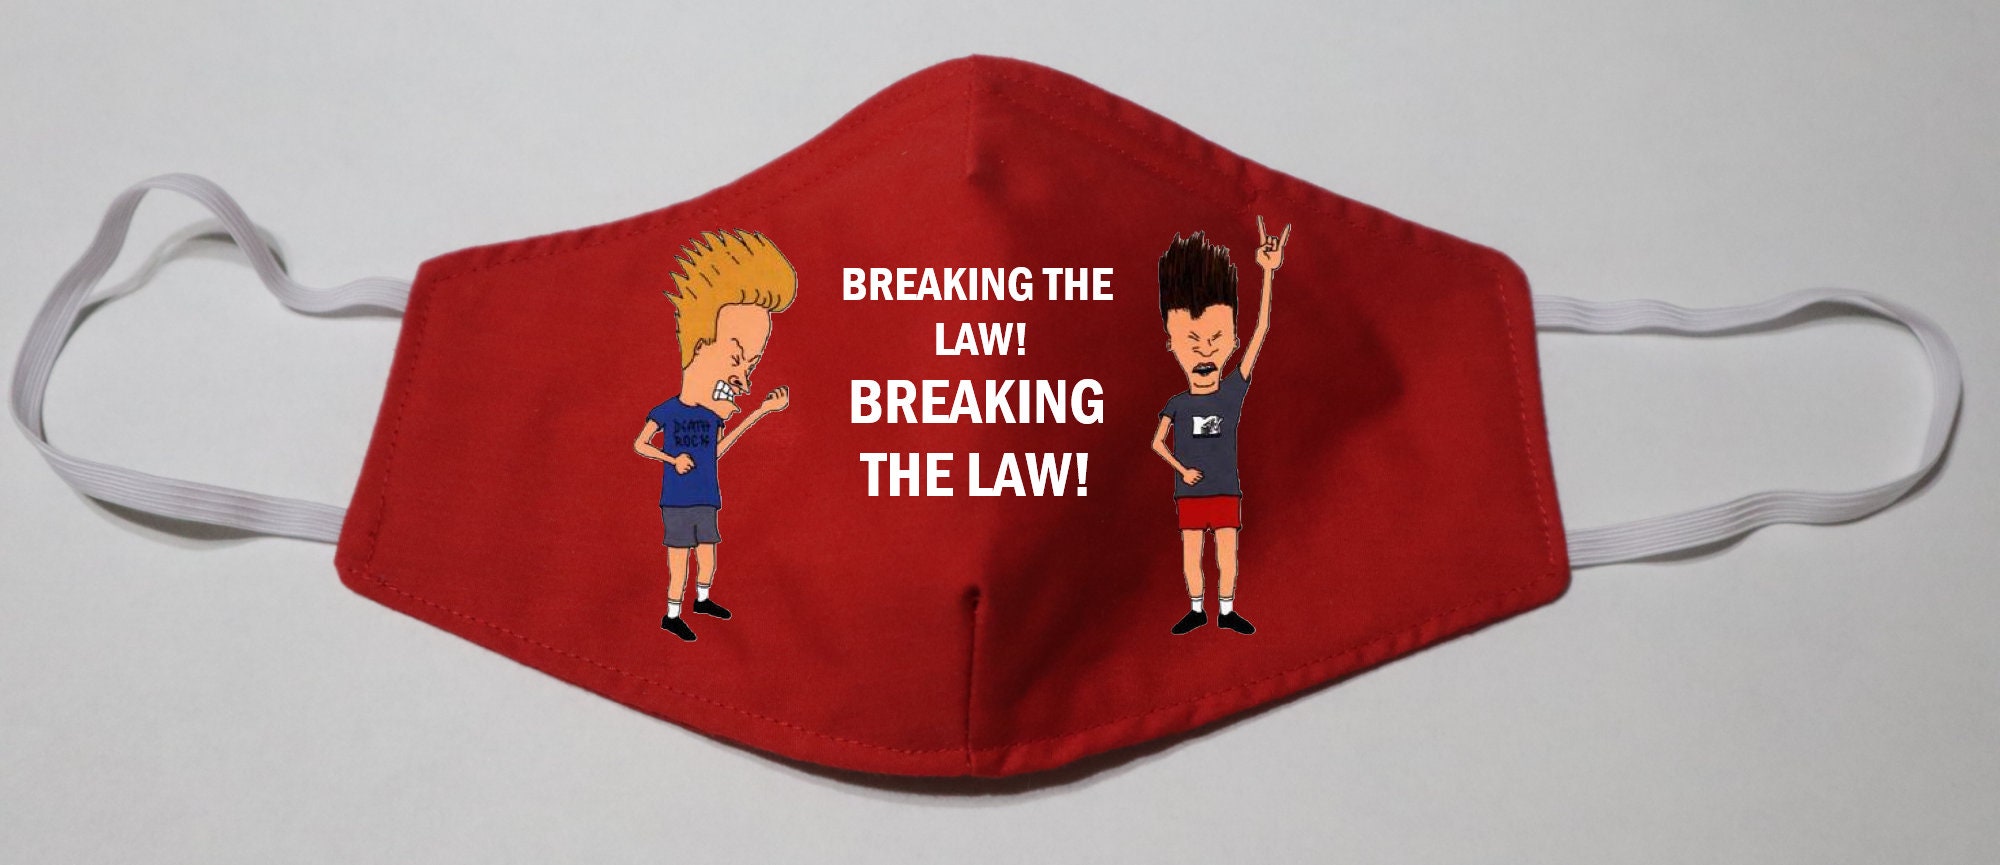 Handmade Cotton Blend Customizable Face Masks With Adjustable Ear-Loops - Beavis & Butt-Head Breaking The Law